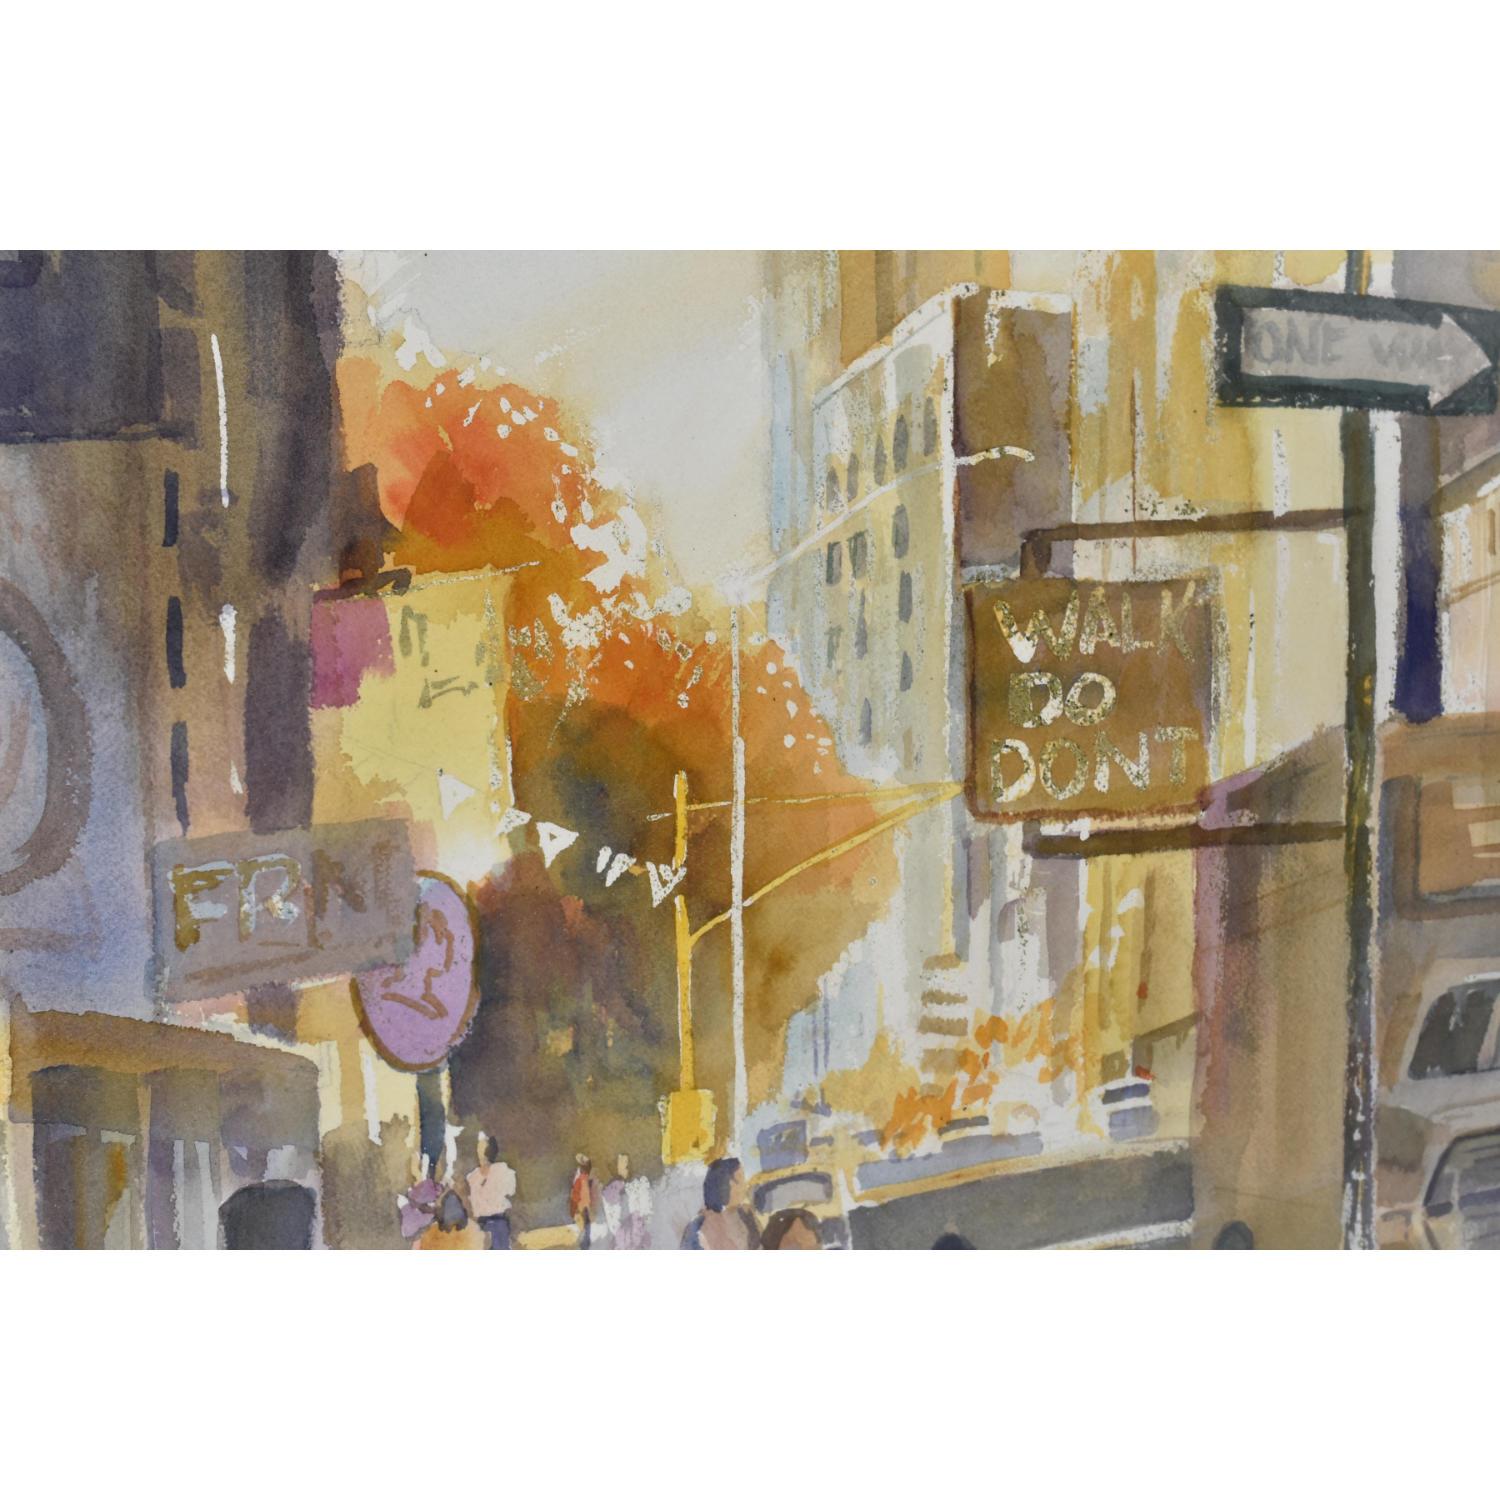 James C. Borden Large Cityscape Street Scene Watercolor Painting Cerused Frame In Excellent Condition For Sale In Chattanooga, TN